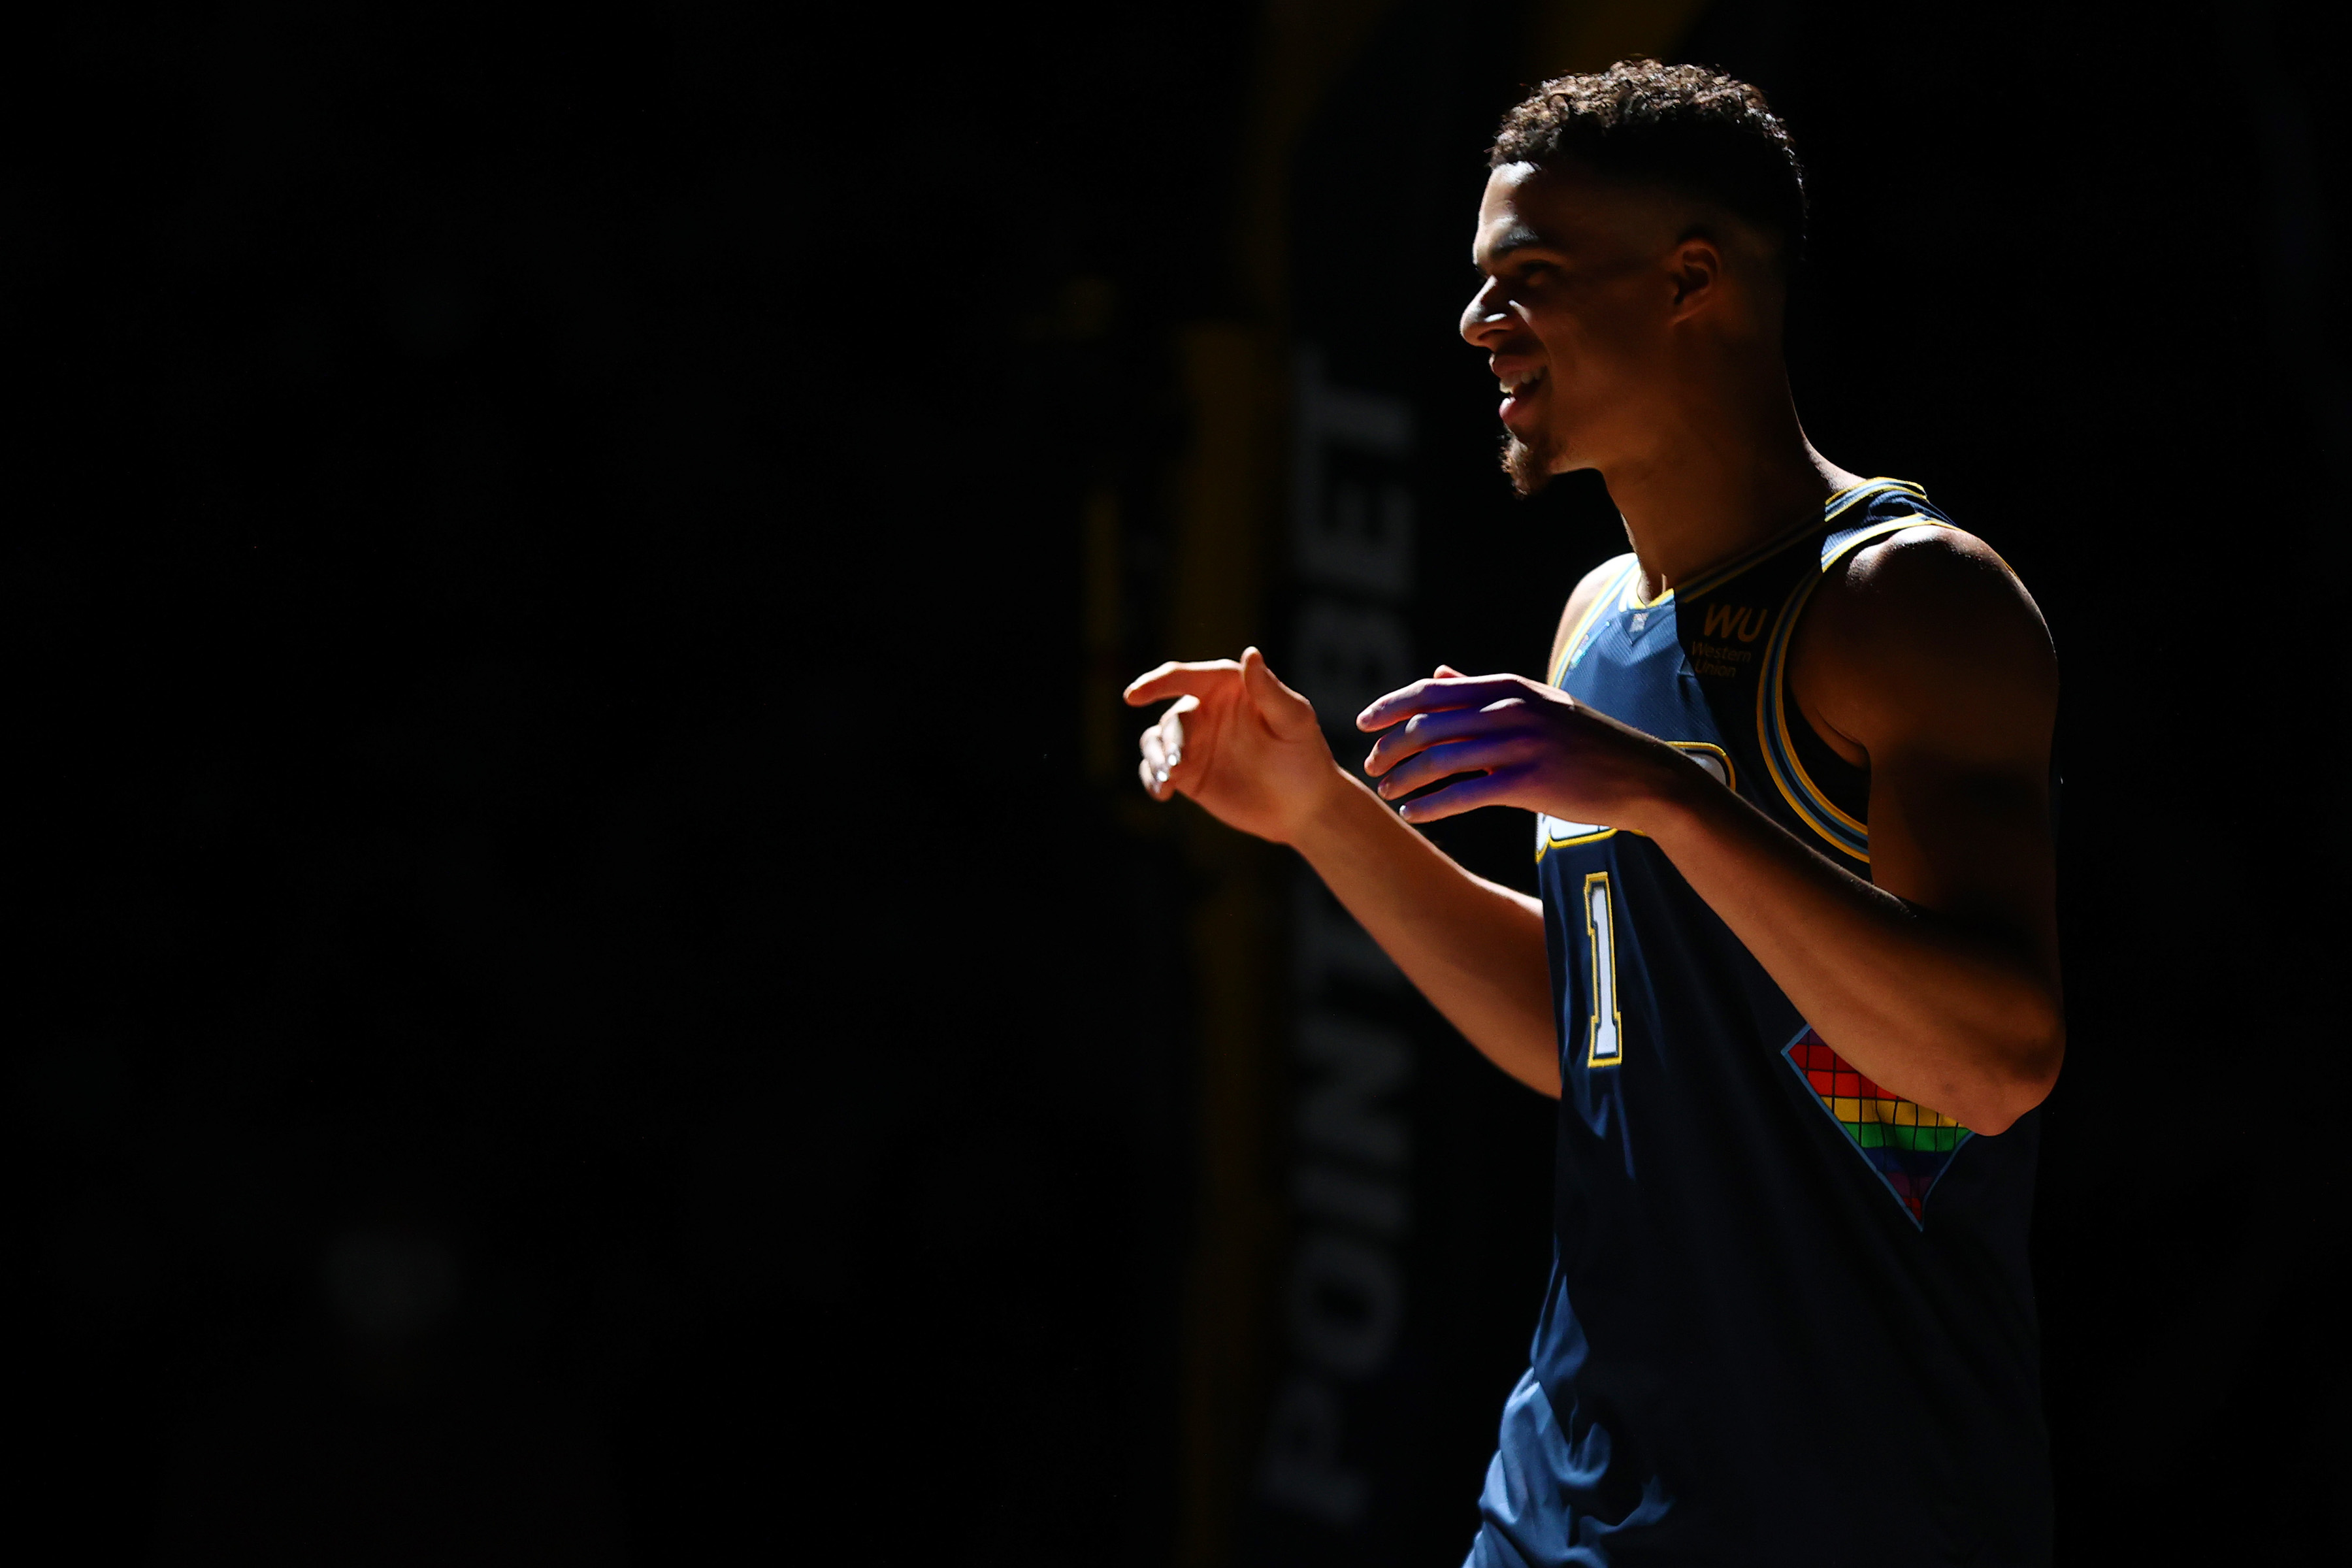 Denver Nuggets swingman Michael Porter Jr. is introduced during a game against the Houston Rockets